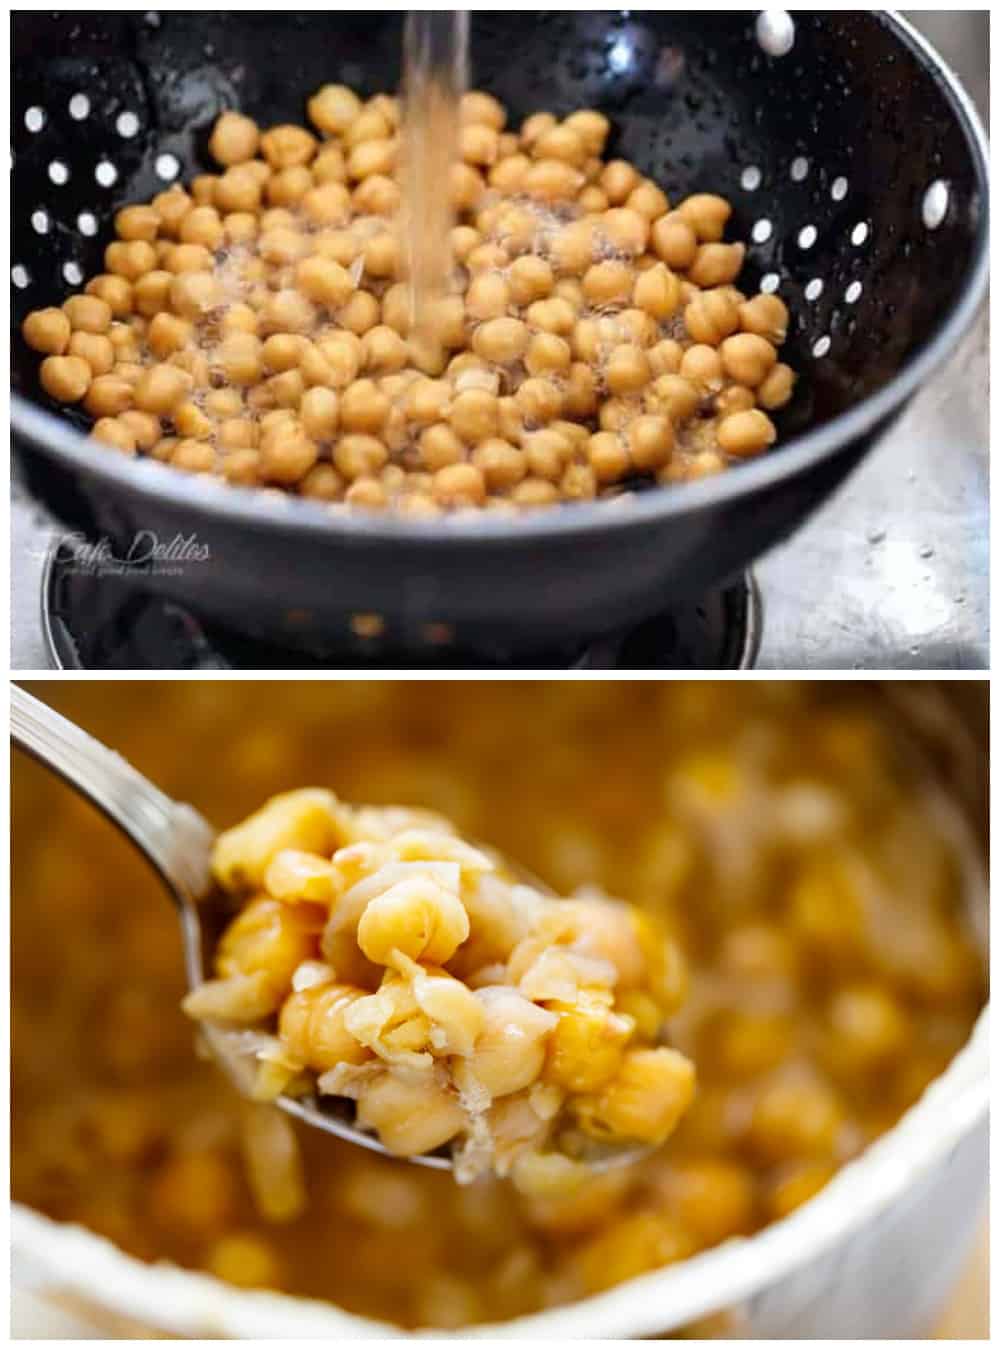 How to make avocado hummus in a collage. Top image: washing chickpeas in a black strainer under cold running water. Bottom image: A spoon holding boiled chickpeas softened, just above a blurred pot full of boiled chickpeas.